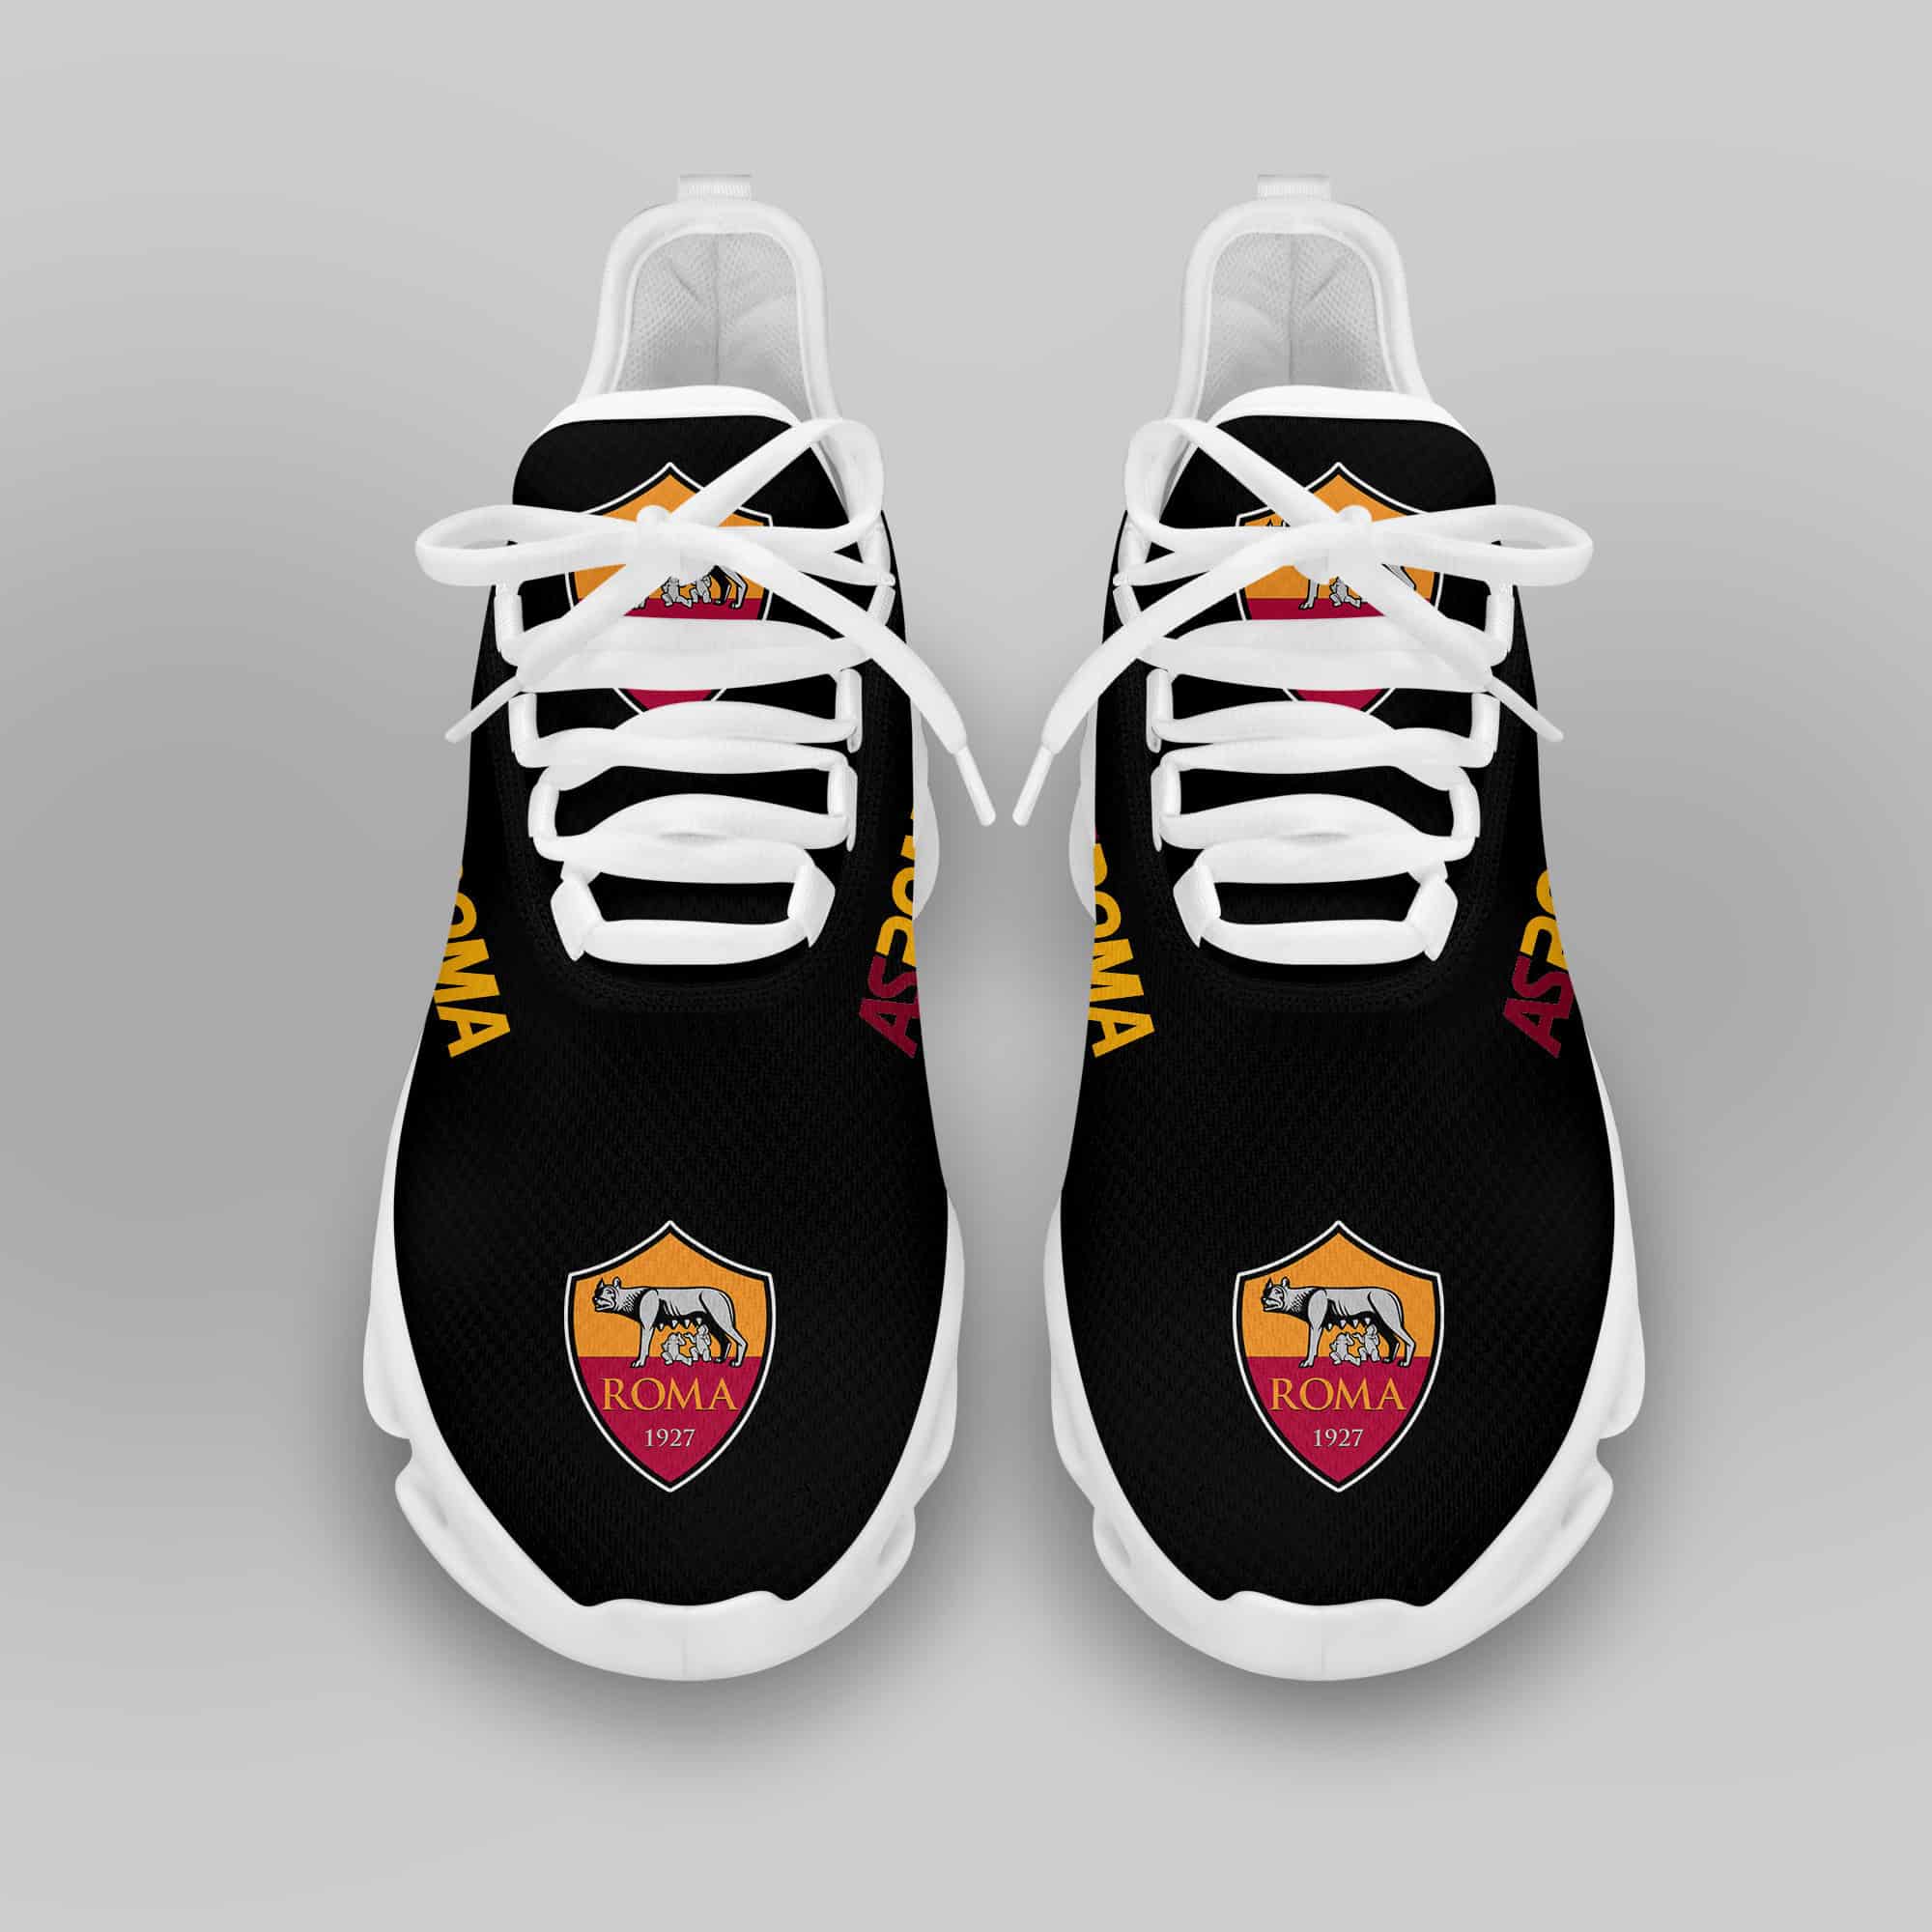 As Roma Running Shoes Max Soul Shoes Sneakers Ver 28 3